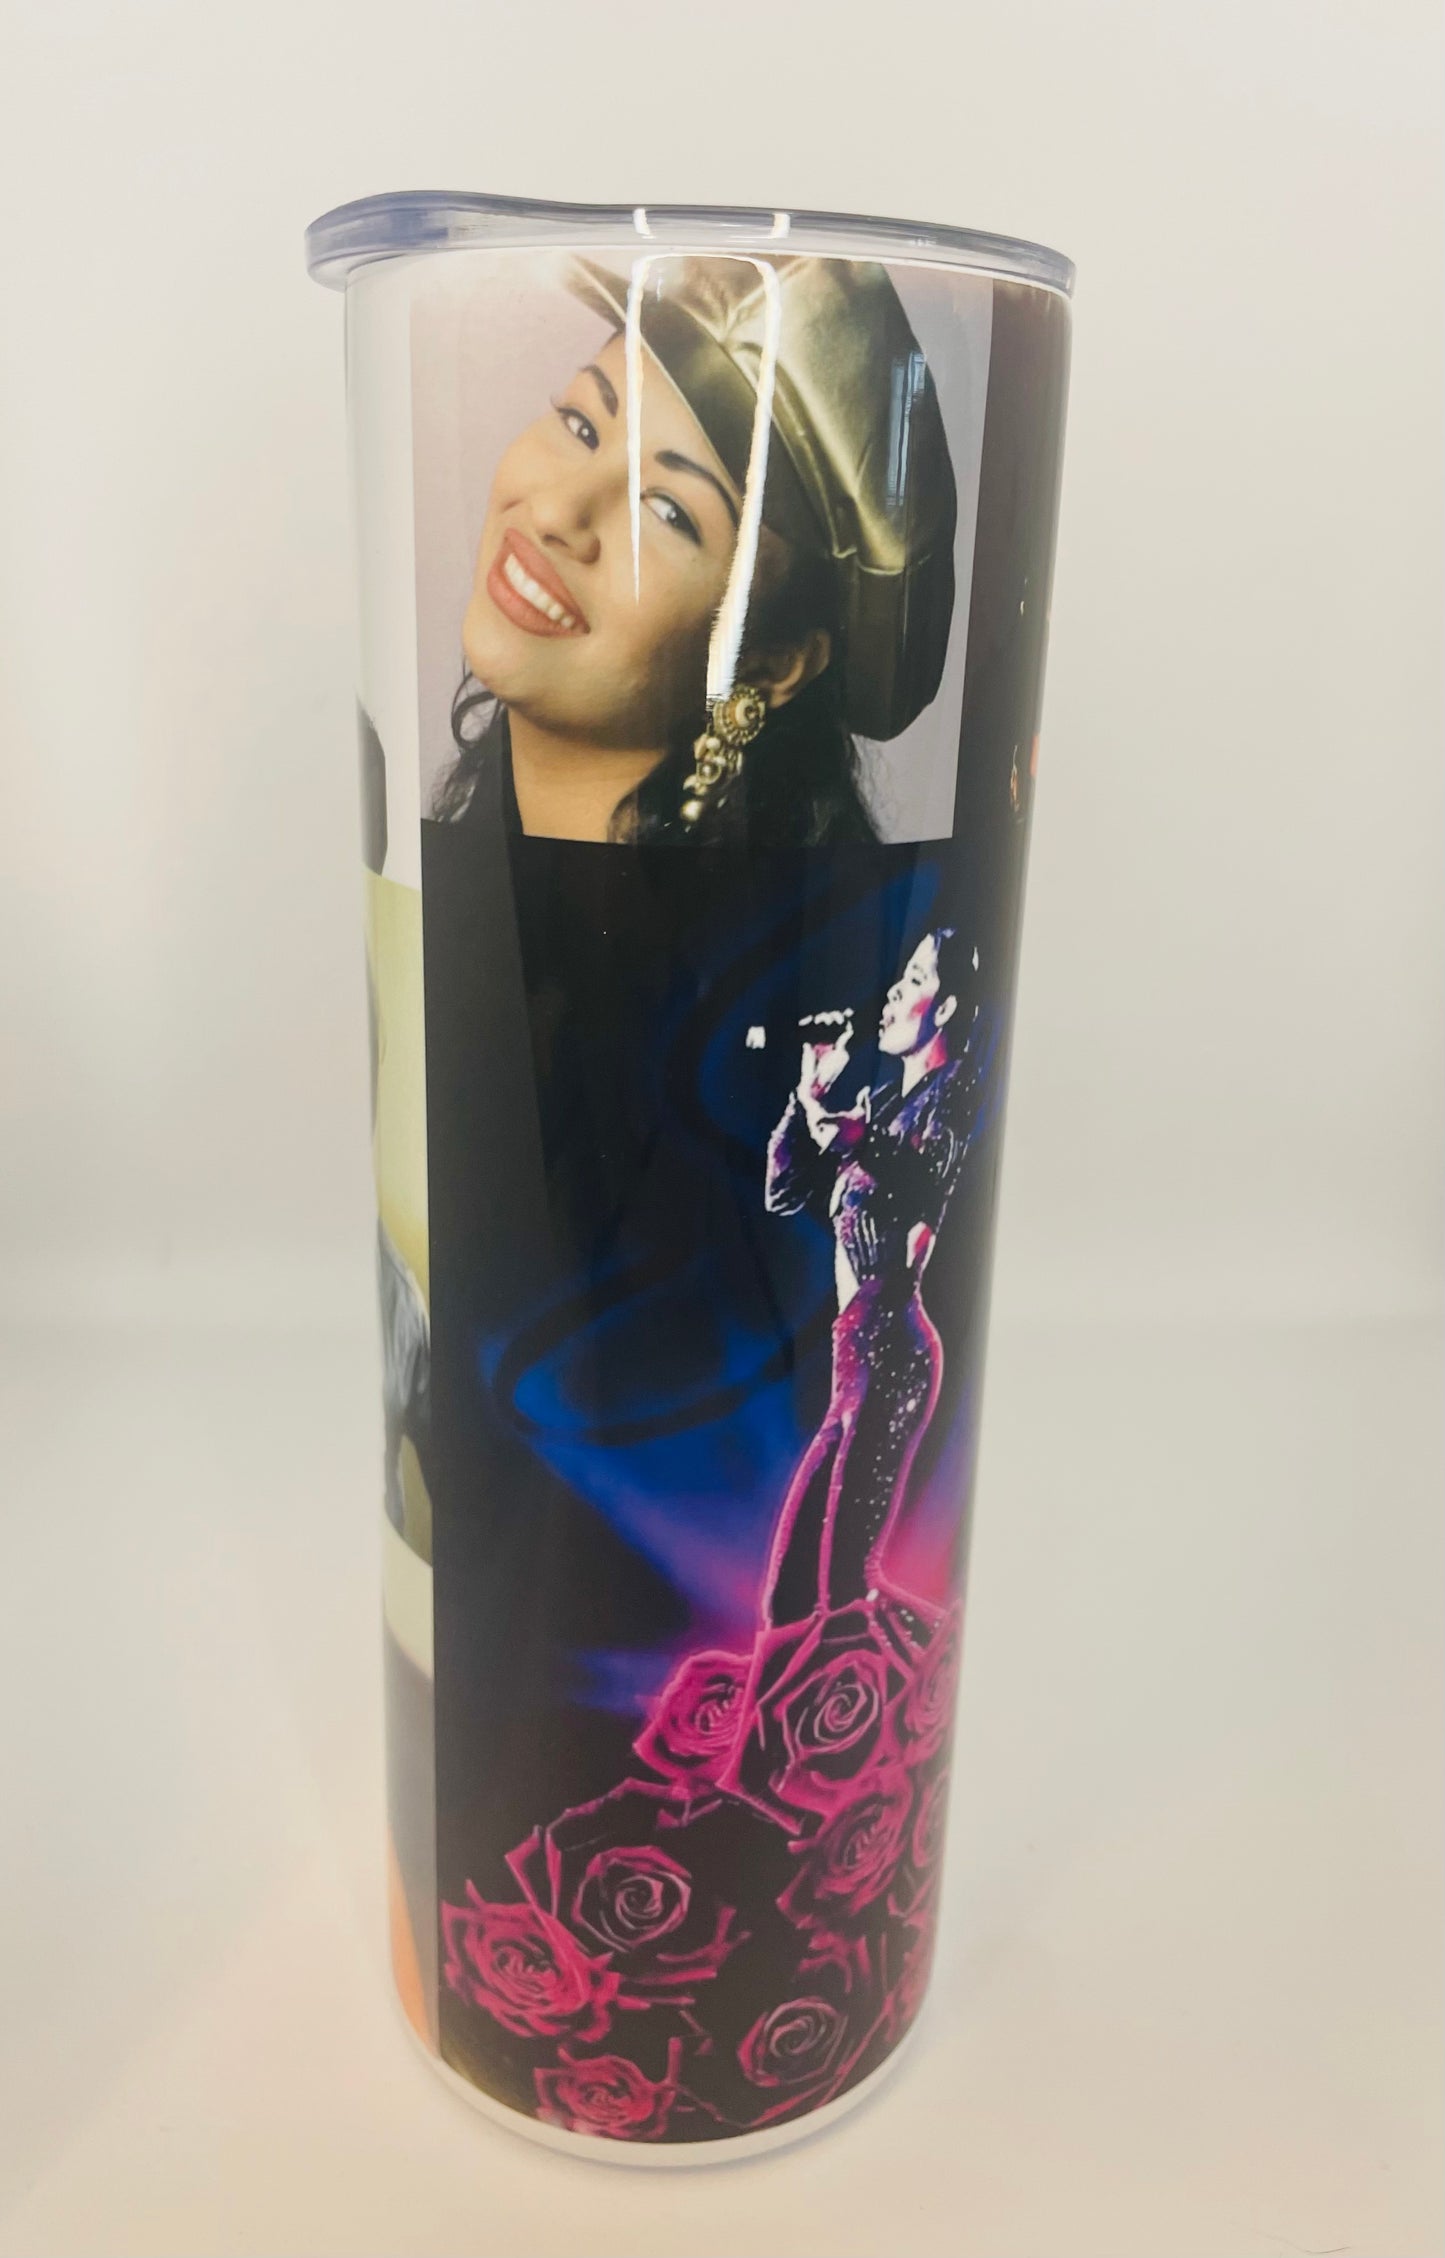 Customized Tumblers, Custom Made Cups, Personalized Tumblers, Personalized Cups, Selena, Selena Customized Tumblers, Selena Cup, Coffee Cups, Tumblers, Unique Gifts, Personalized Gifts